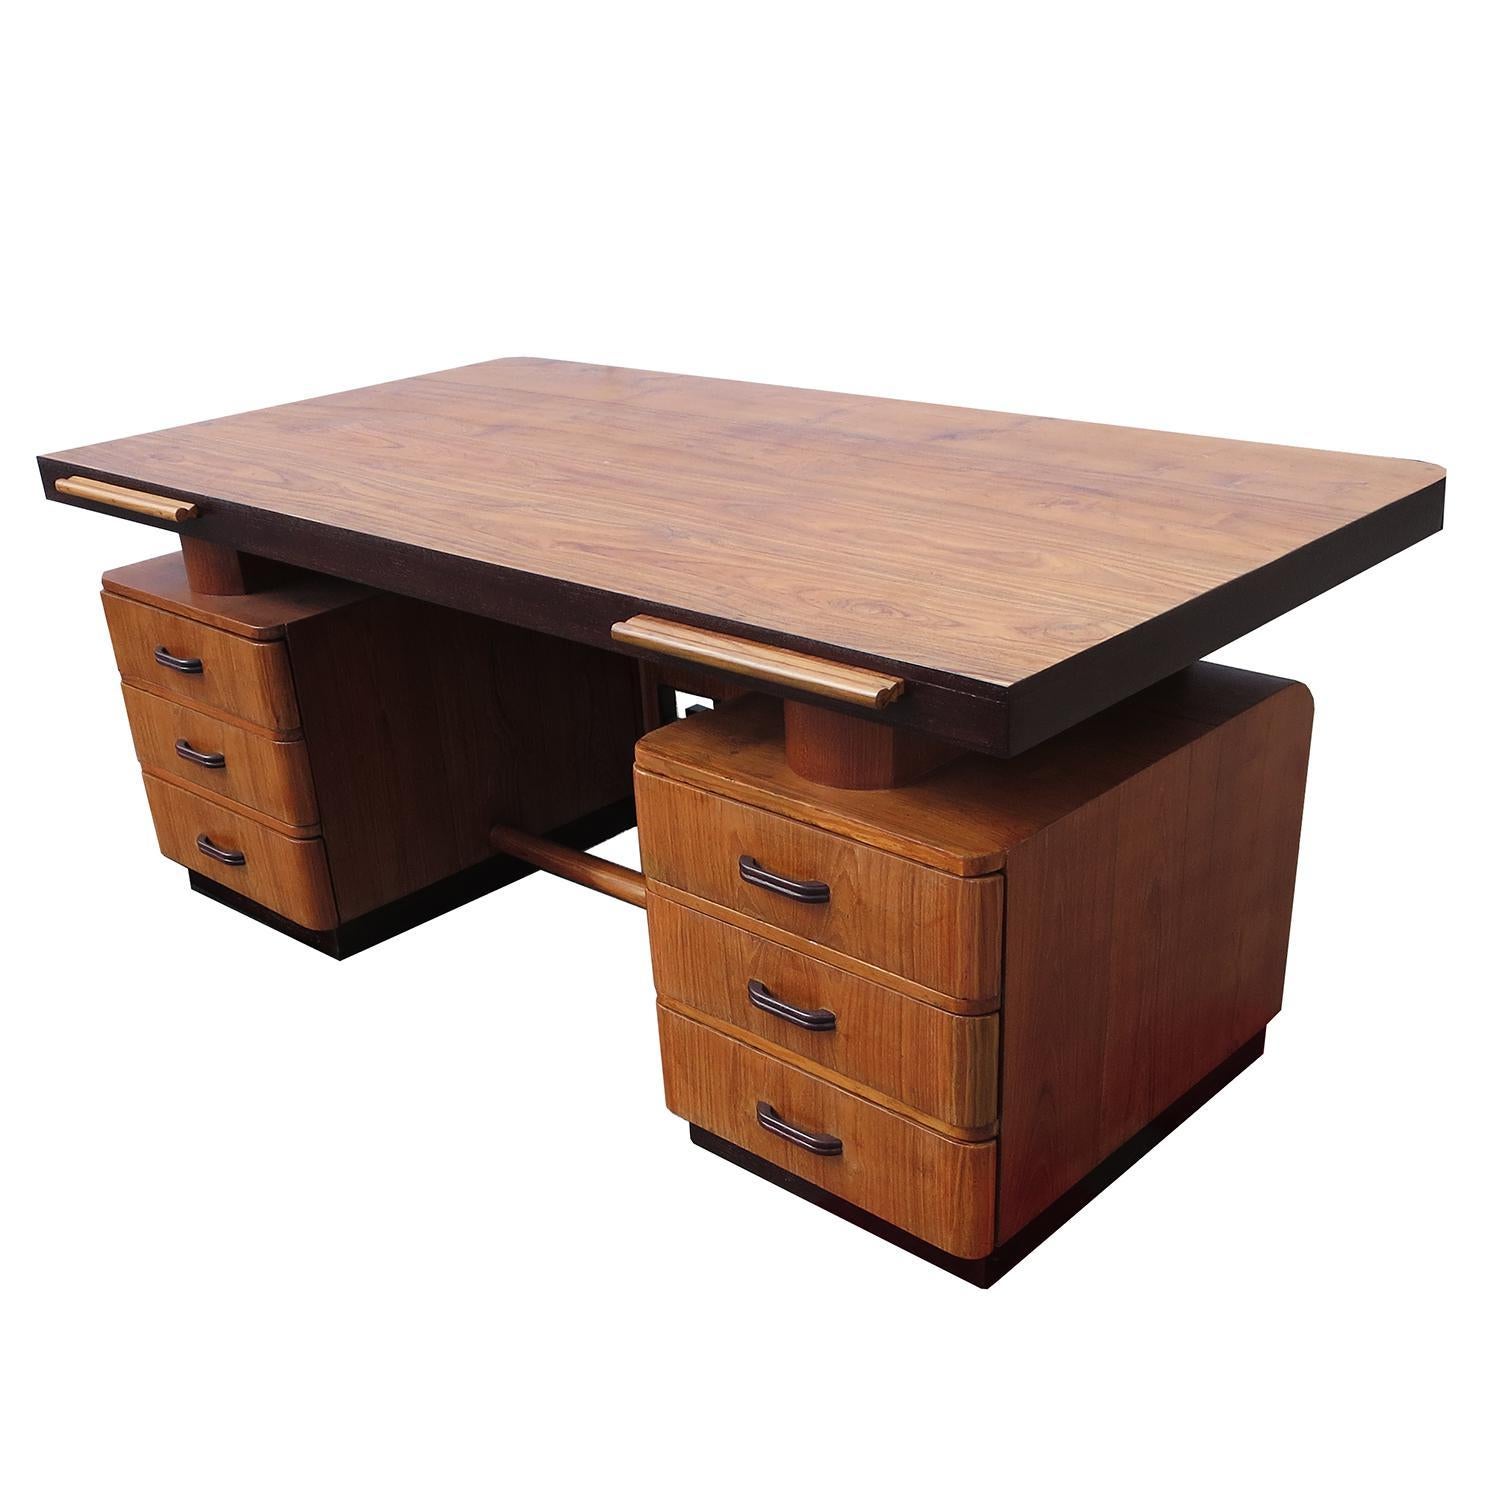 This stylized desk features curved corners and a unique grille in the front center. The expansive top surface seems to float over the top. There are three drawers and pullout / pull-out writing surfaces on each side, for ample storage and